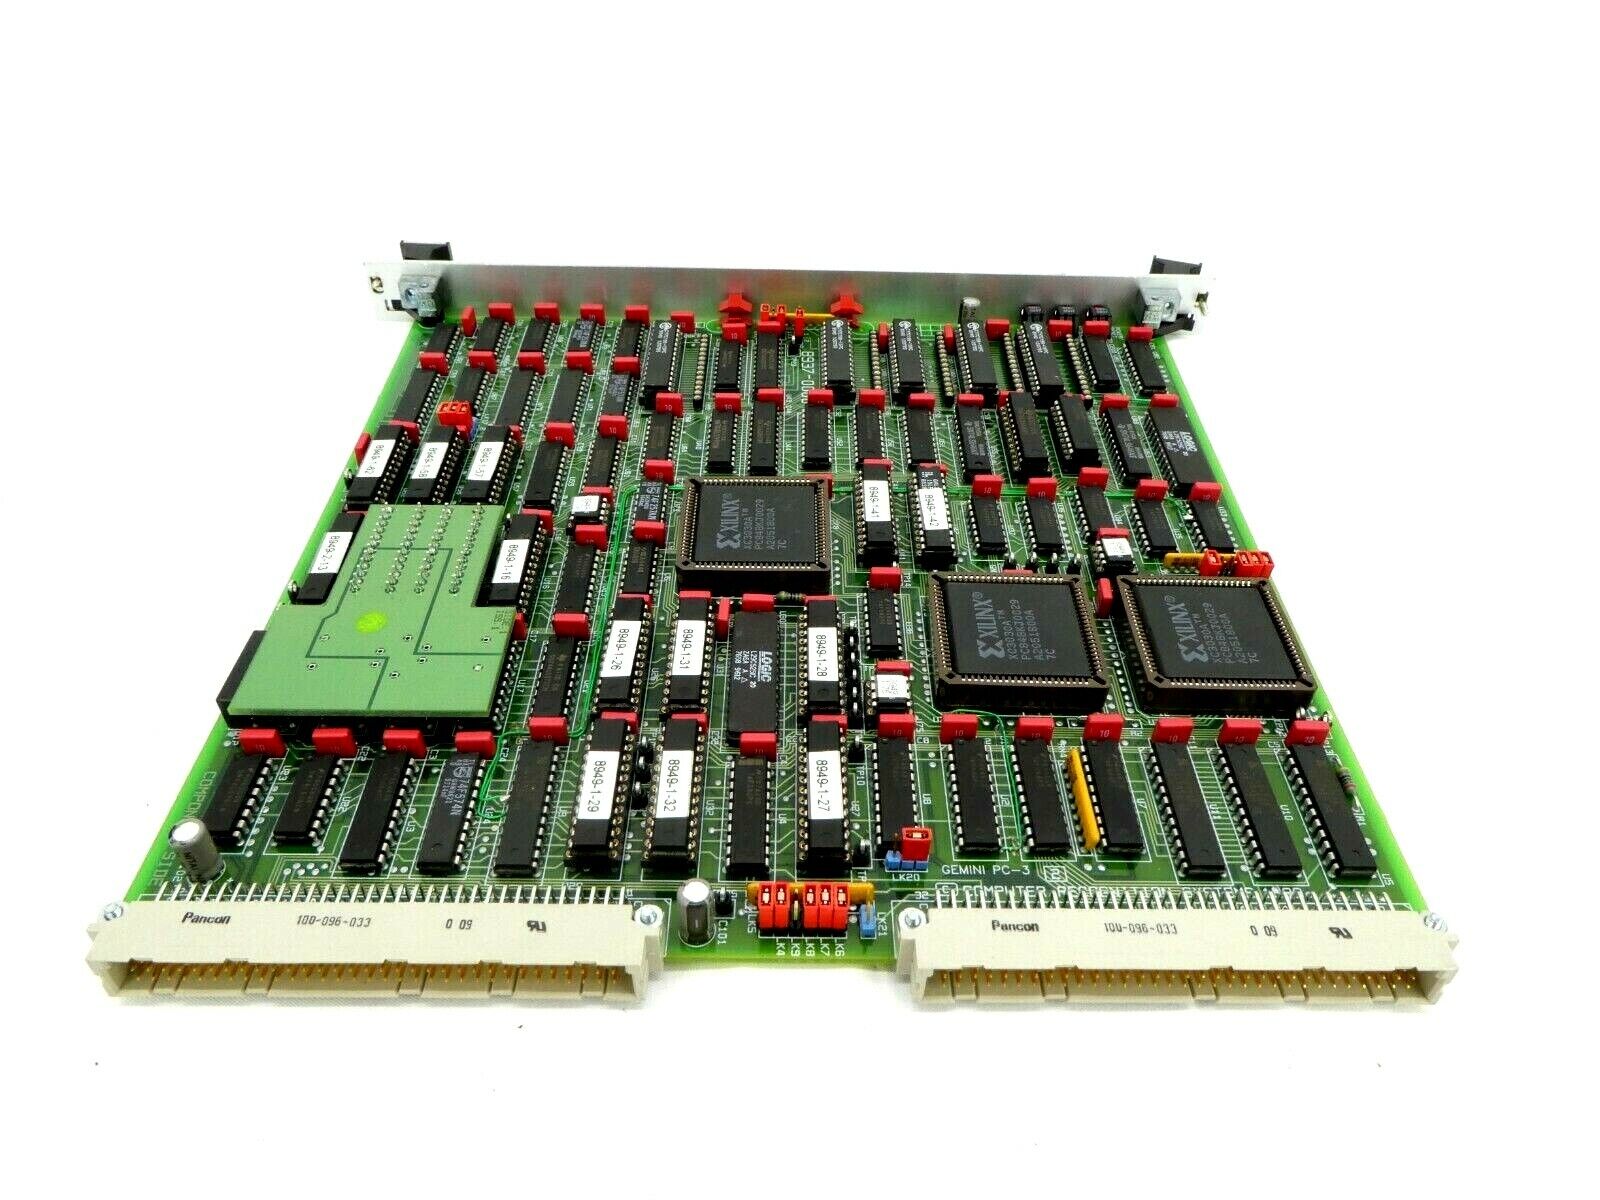 Computer Recognition Systems 8937-0000 Gemini PC-3 VME PCB Card Working Spare